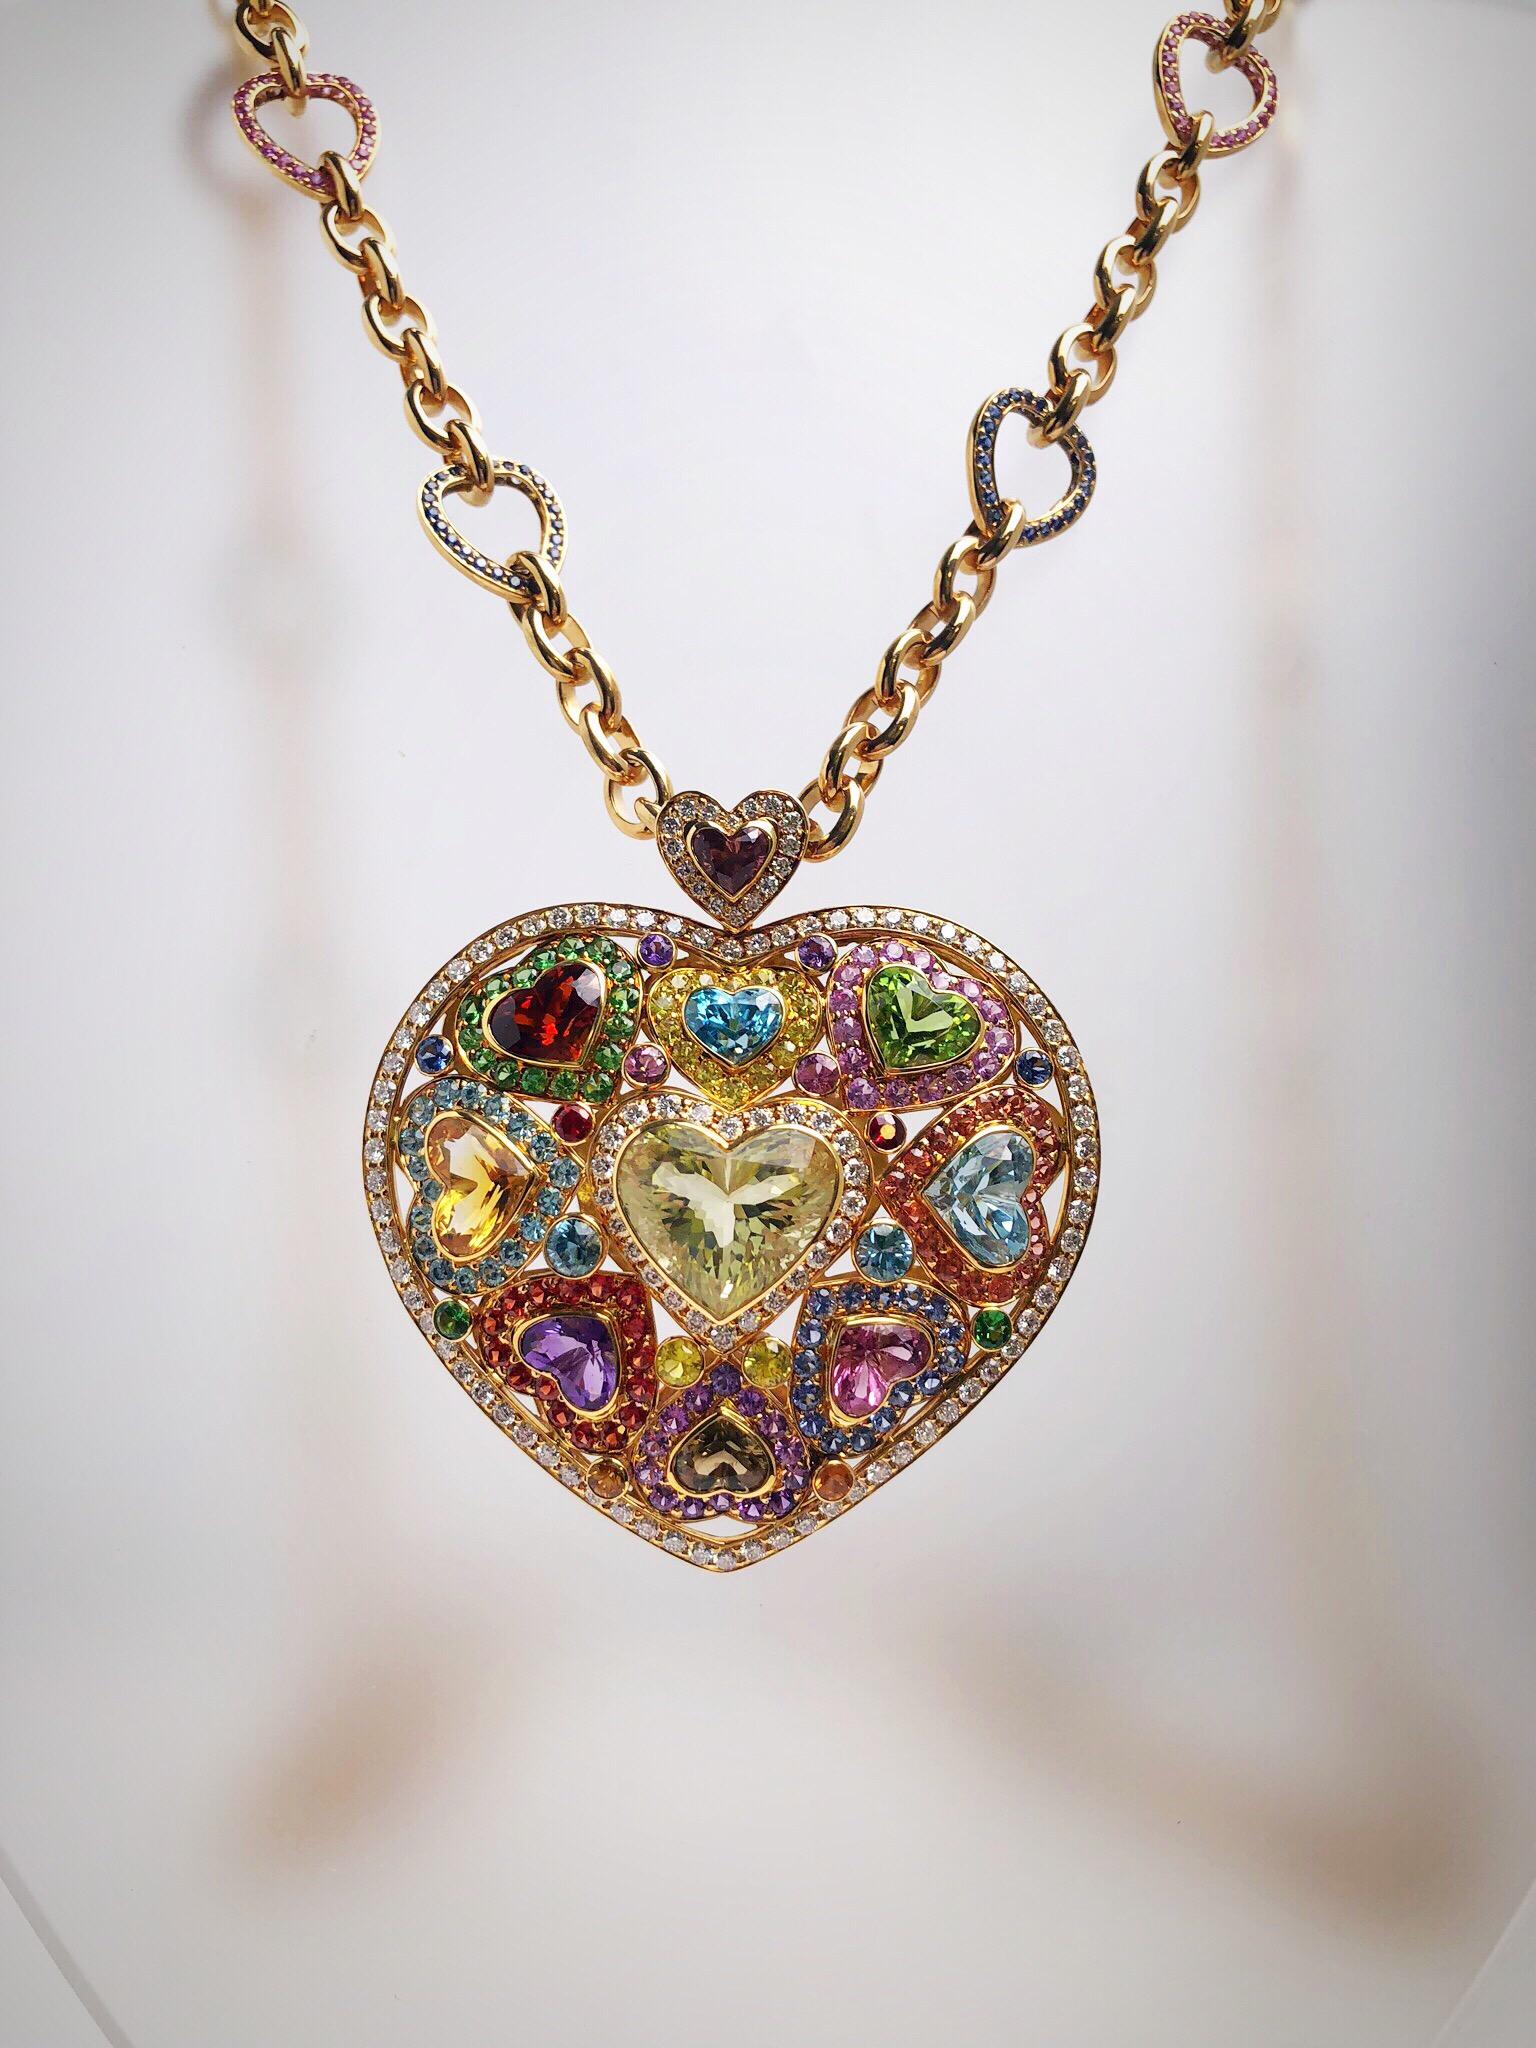 Contemporary 18 Karat Gold and Semiprecious Heart Necklace with 15.94 Multicolored Sapphires